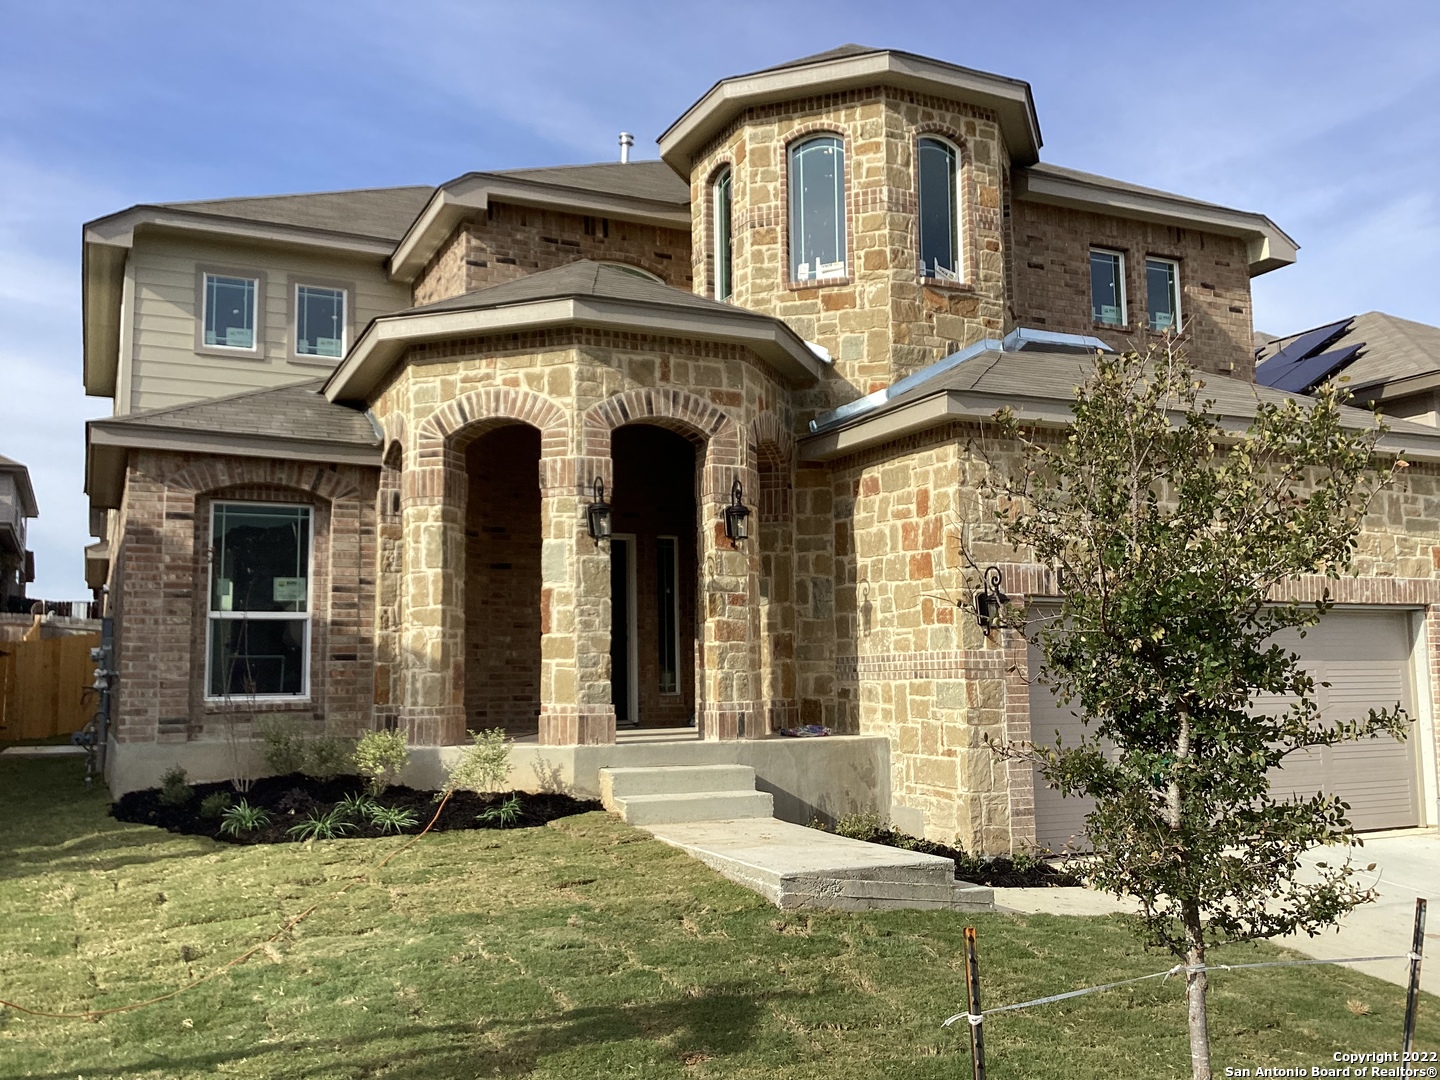 Beautiful 2story with high ceilings. Guest suite or 4th bedroom on main level. His and her closets with large master bathroom and bedroom with bay window. Bridge way that's over looks living room and entry.